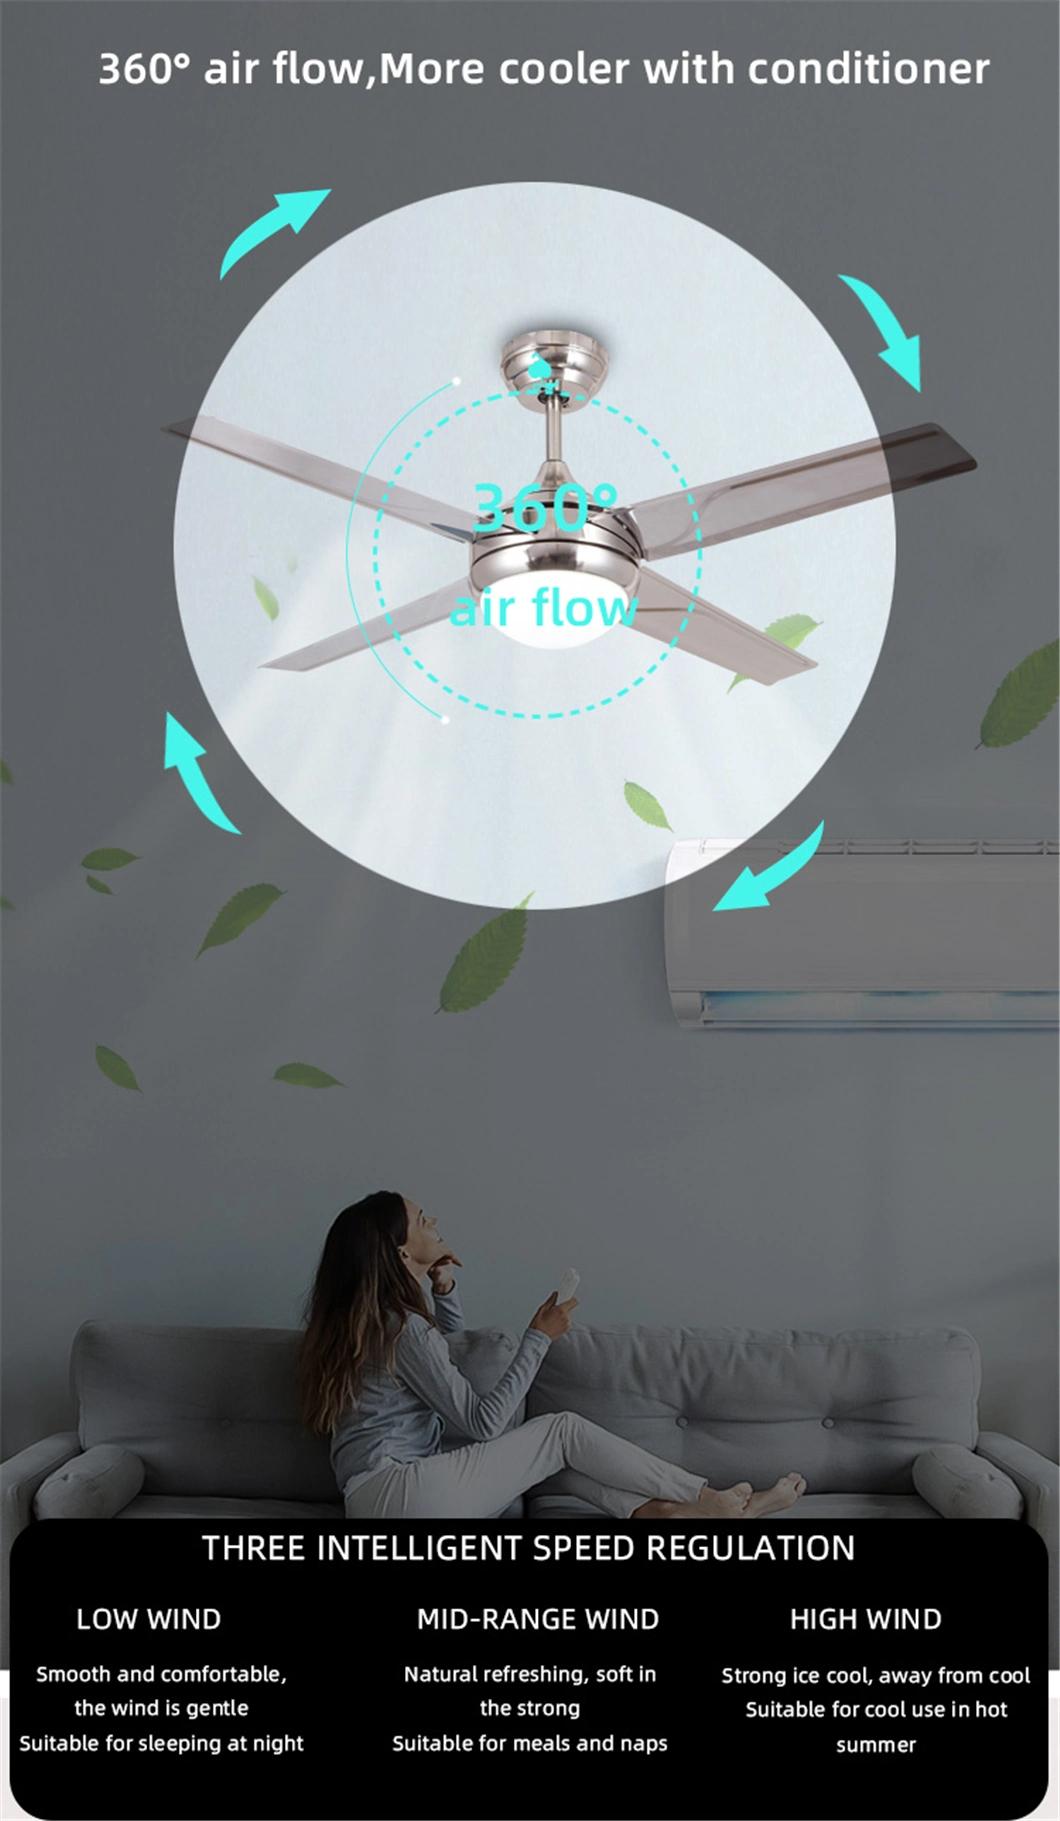 Modern Design Ceiling Fan Light Remote Control 3 Speed Choice 3 Colors Change Chandeliers with Fan